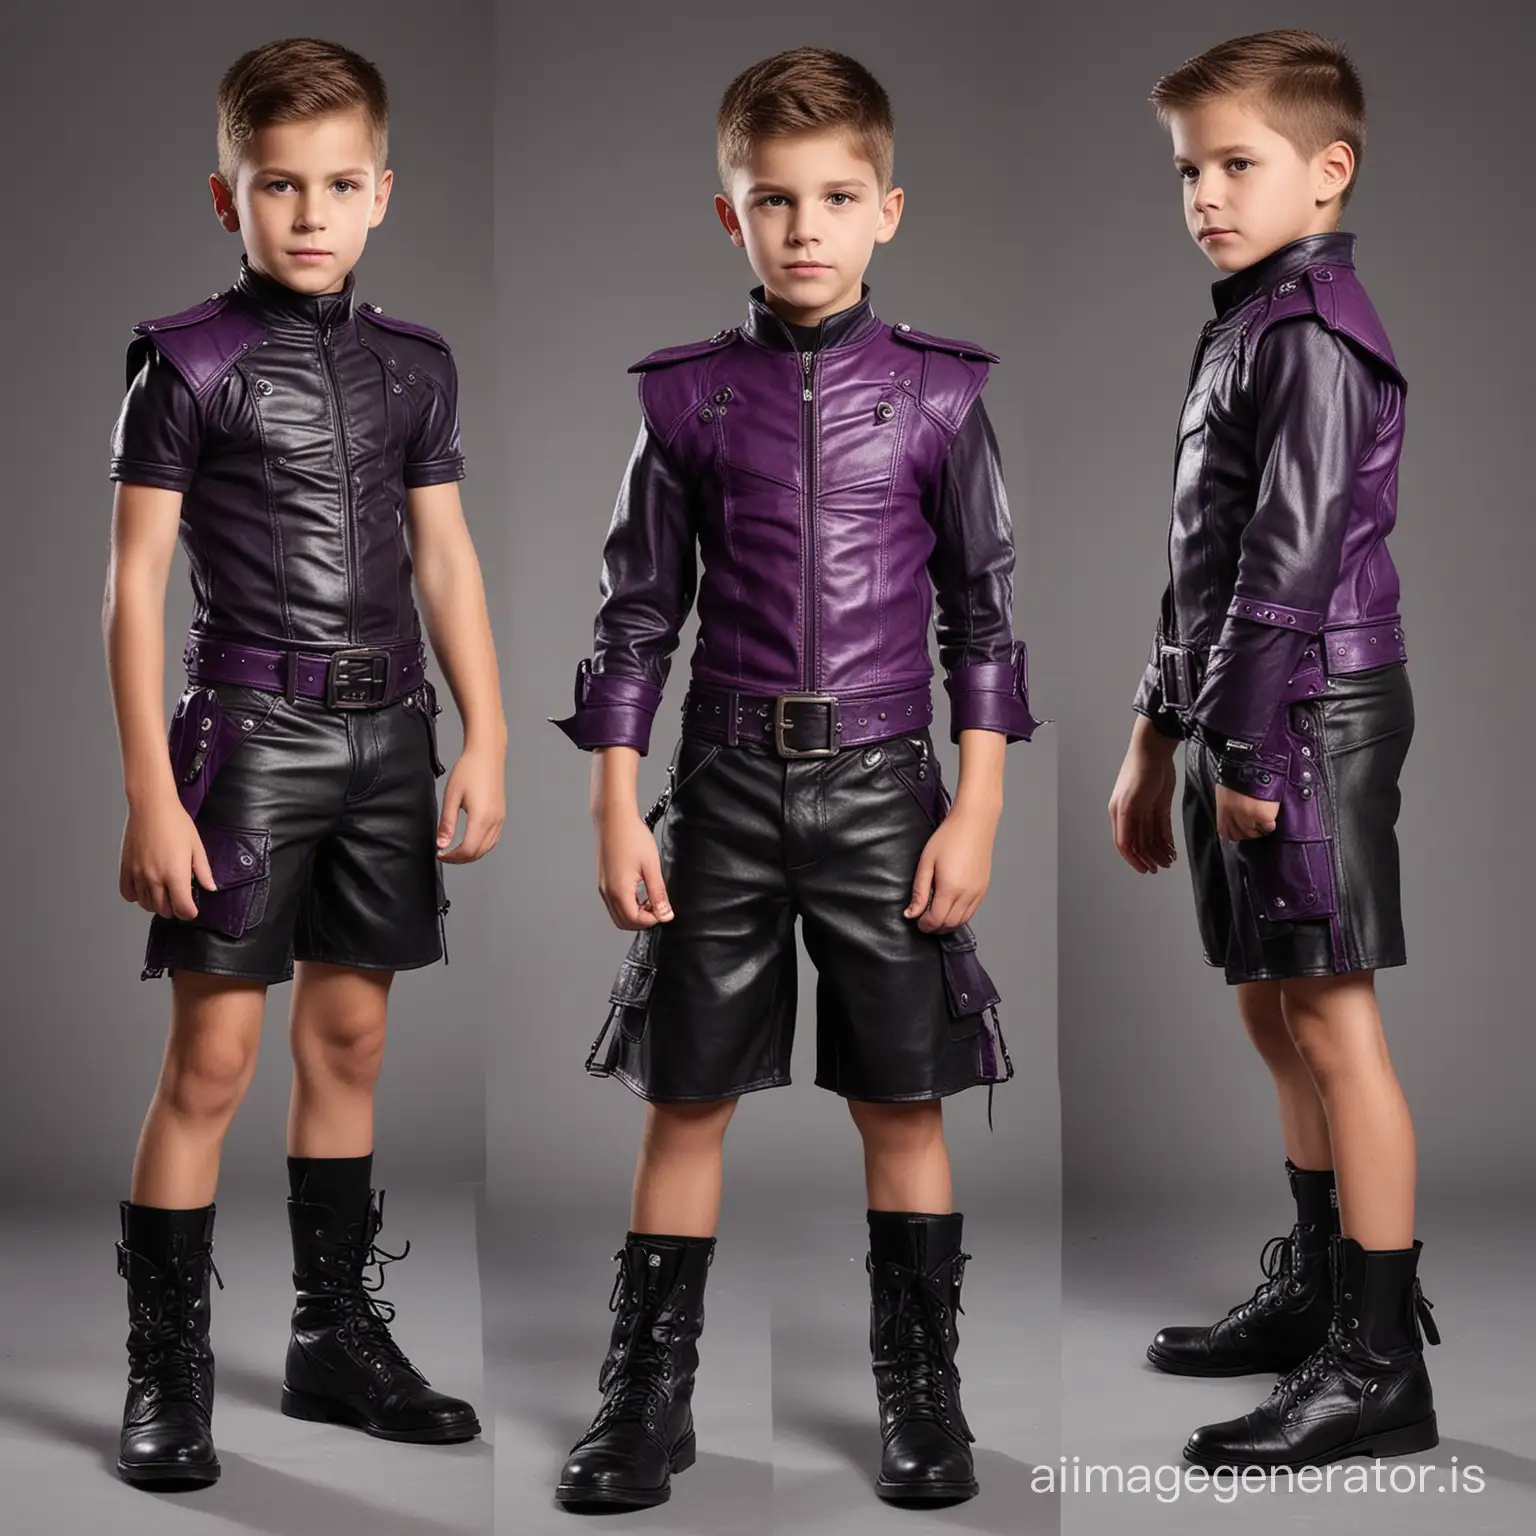 Create a villain outfit for a strong 8 year old boy villain with abs, cool, wicked, leather, shorts, comfortable yet intimidating, various shades of purple with hints of red, green and black